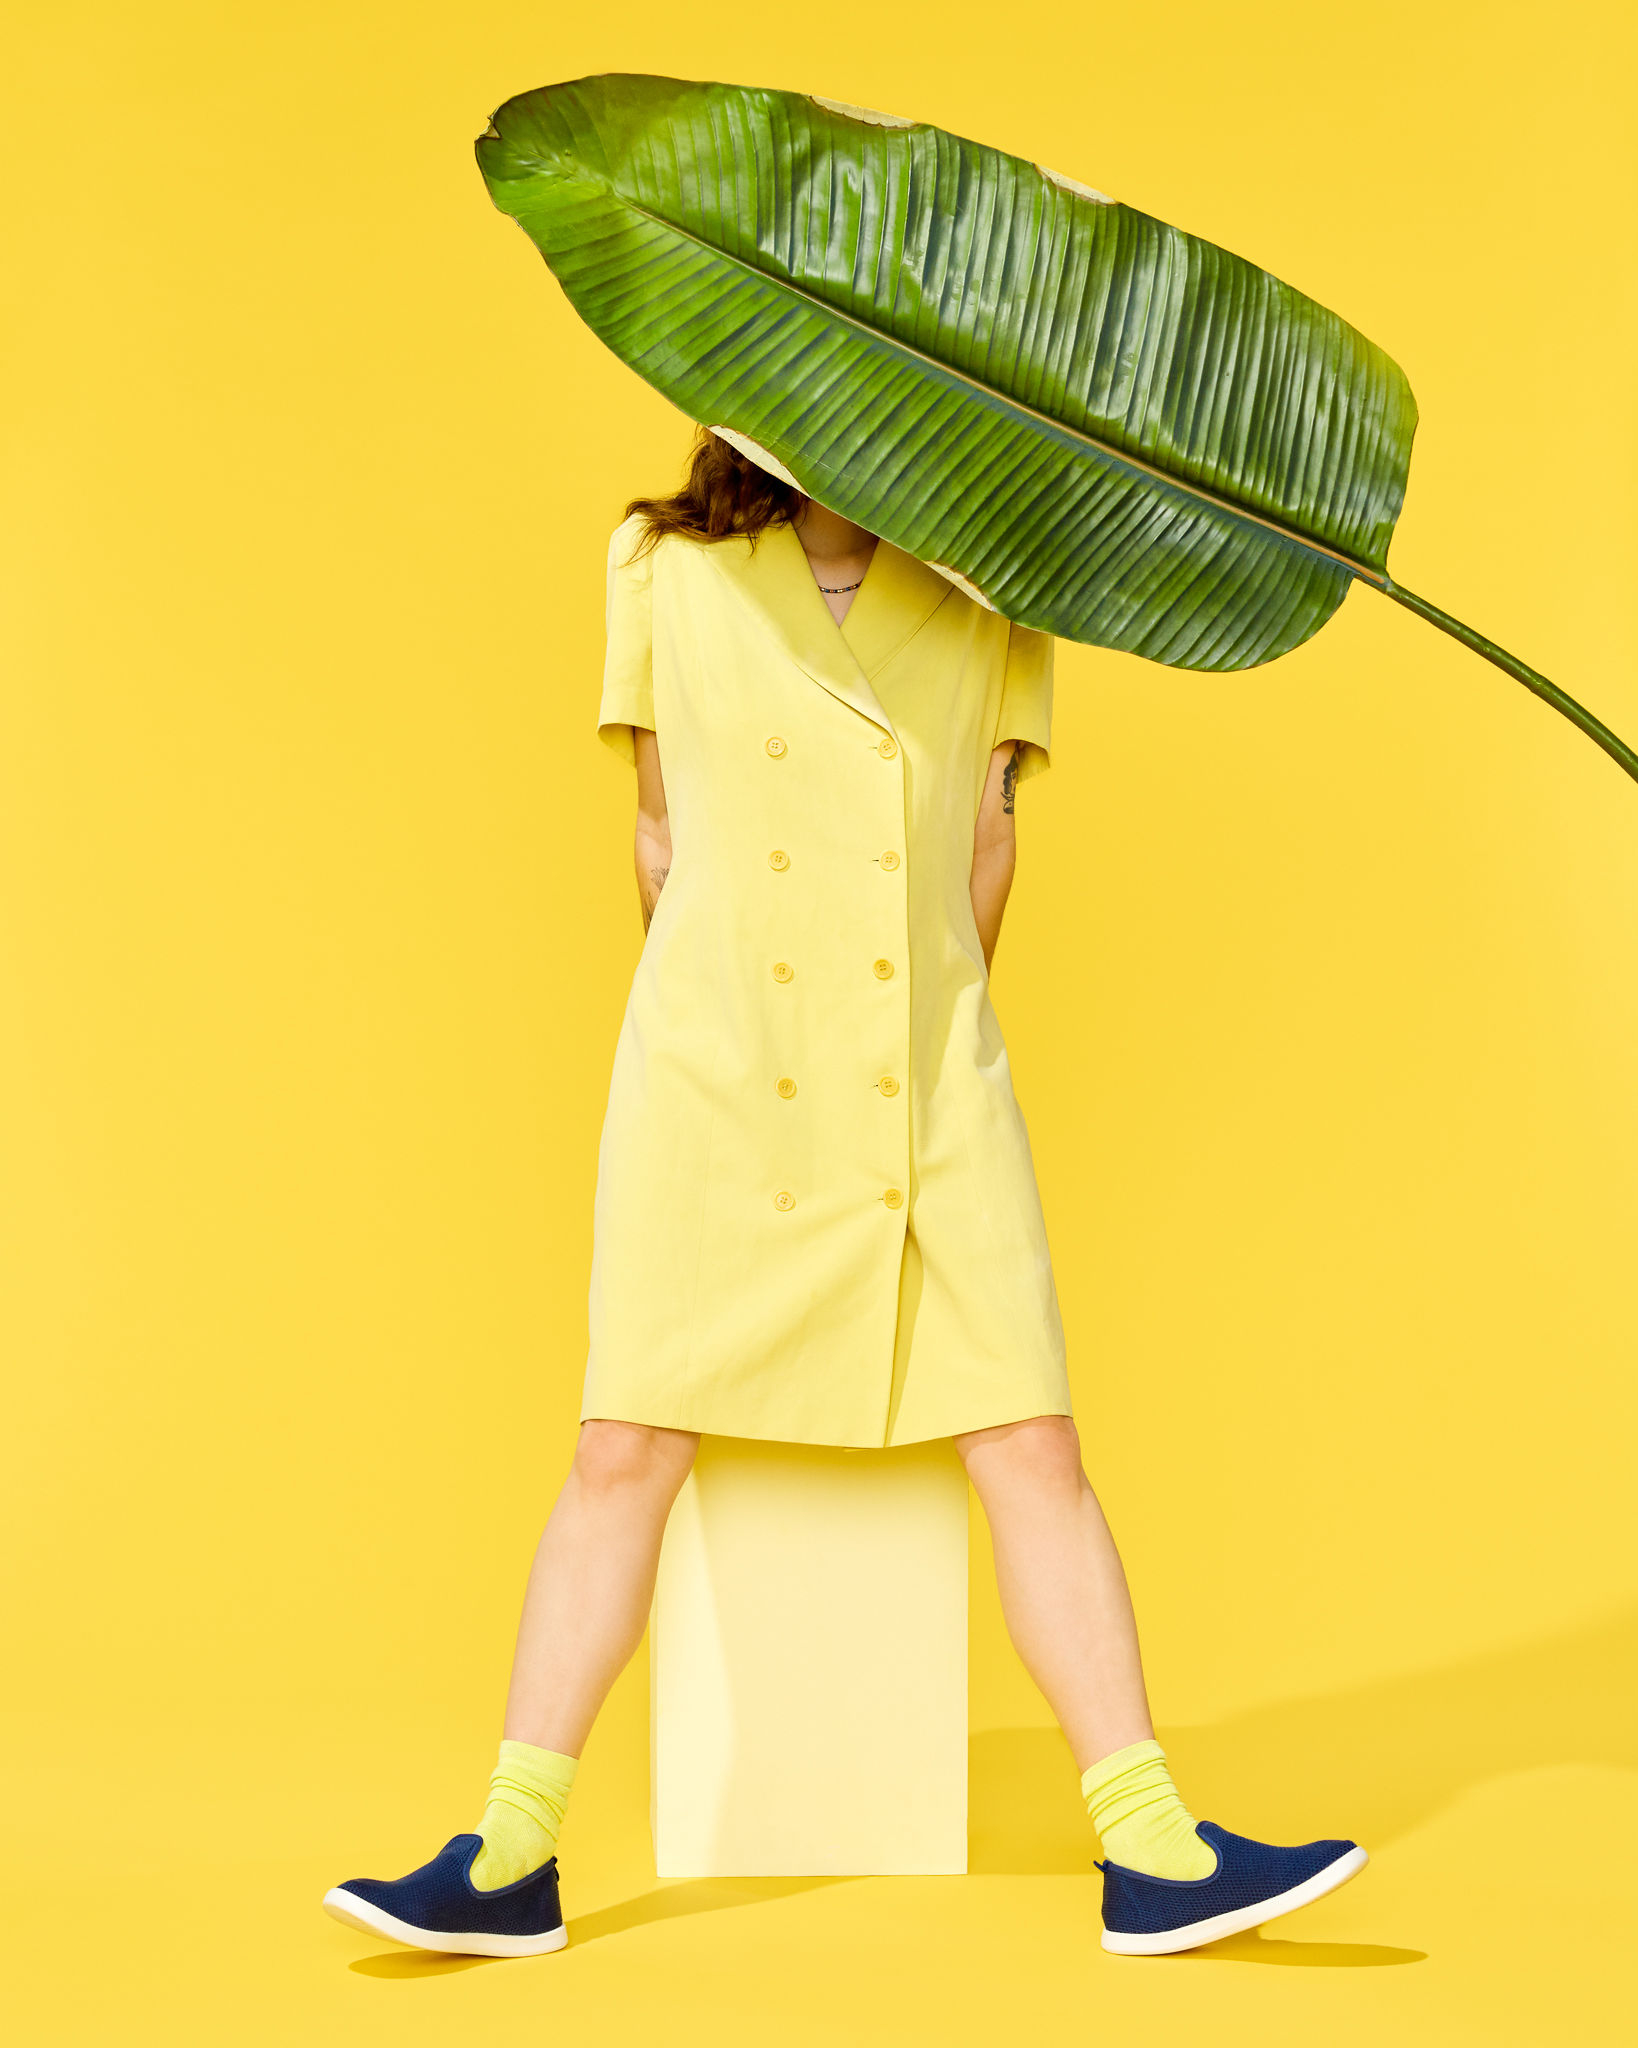 A woman elegantly presents a vibrant yellow dress, her head playfully concealed behind a large, lush green leaf. The background harmoniously echoes the radiant yellow tones, creating a captivating and visually cohesive composition, photo by TROPICO PHOTO.